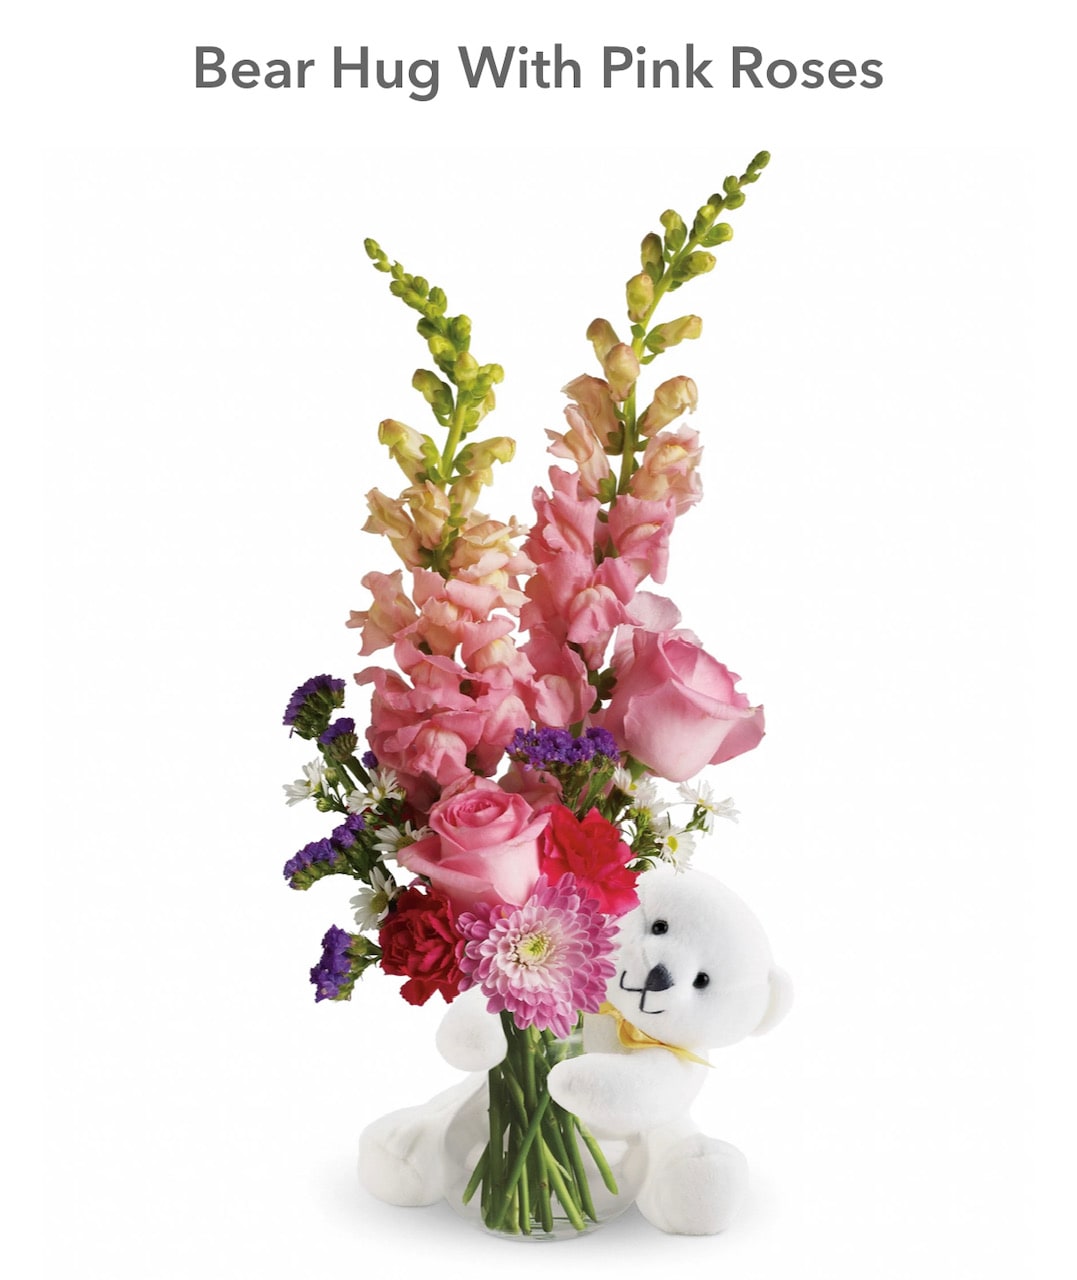 Bear Hug with Pink Roses - Send this adorable little bear with enchanting flowers, and someone special will think you're just as sweet as can be. 